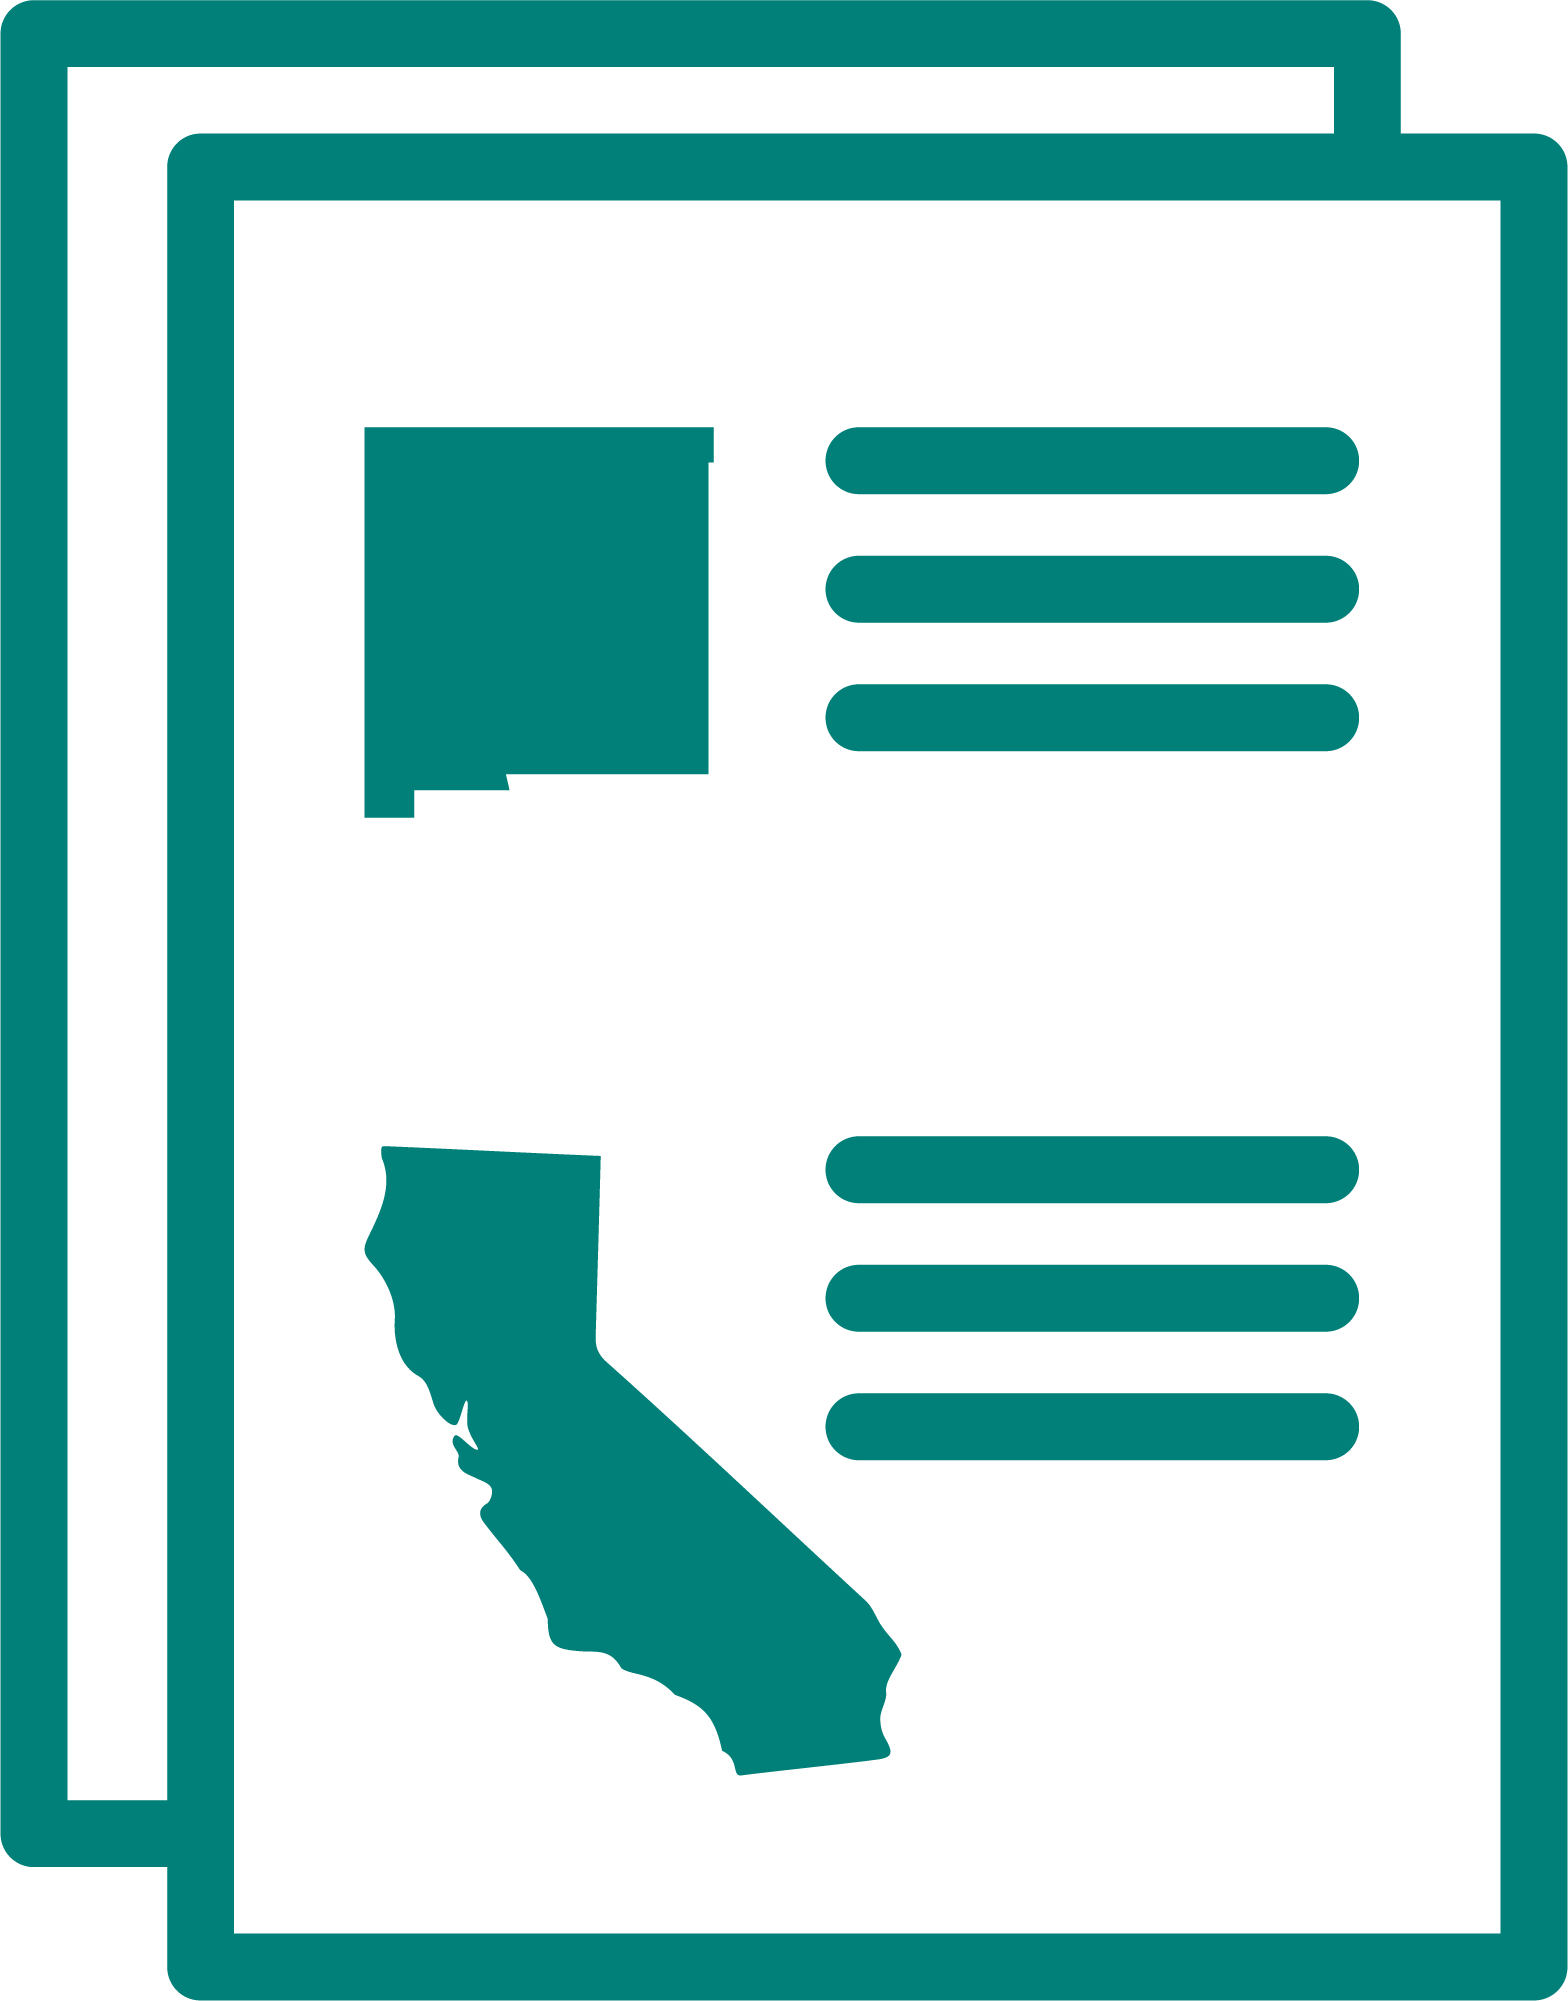 NM and CA policy document icon